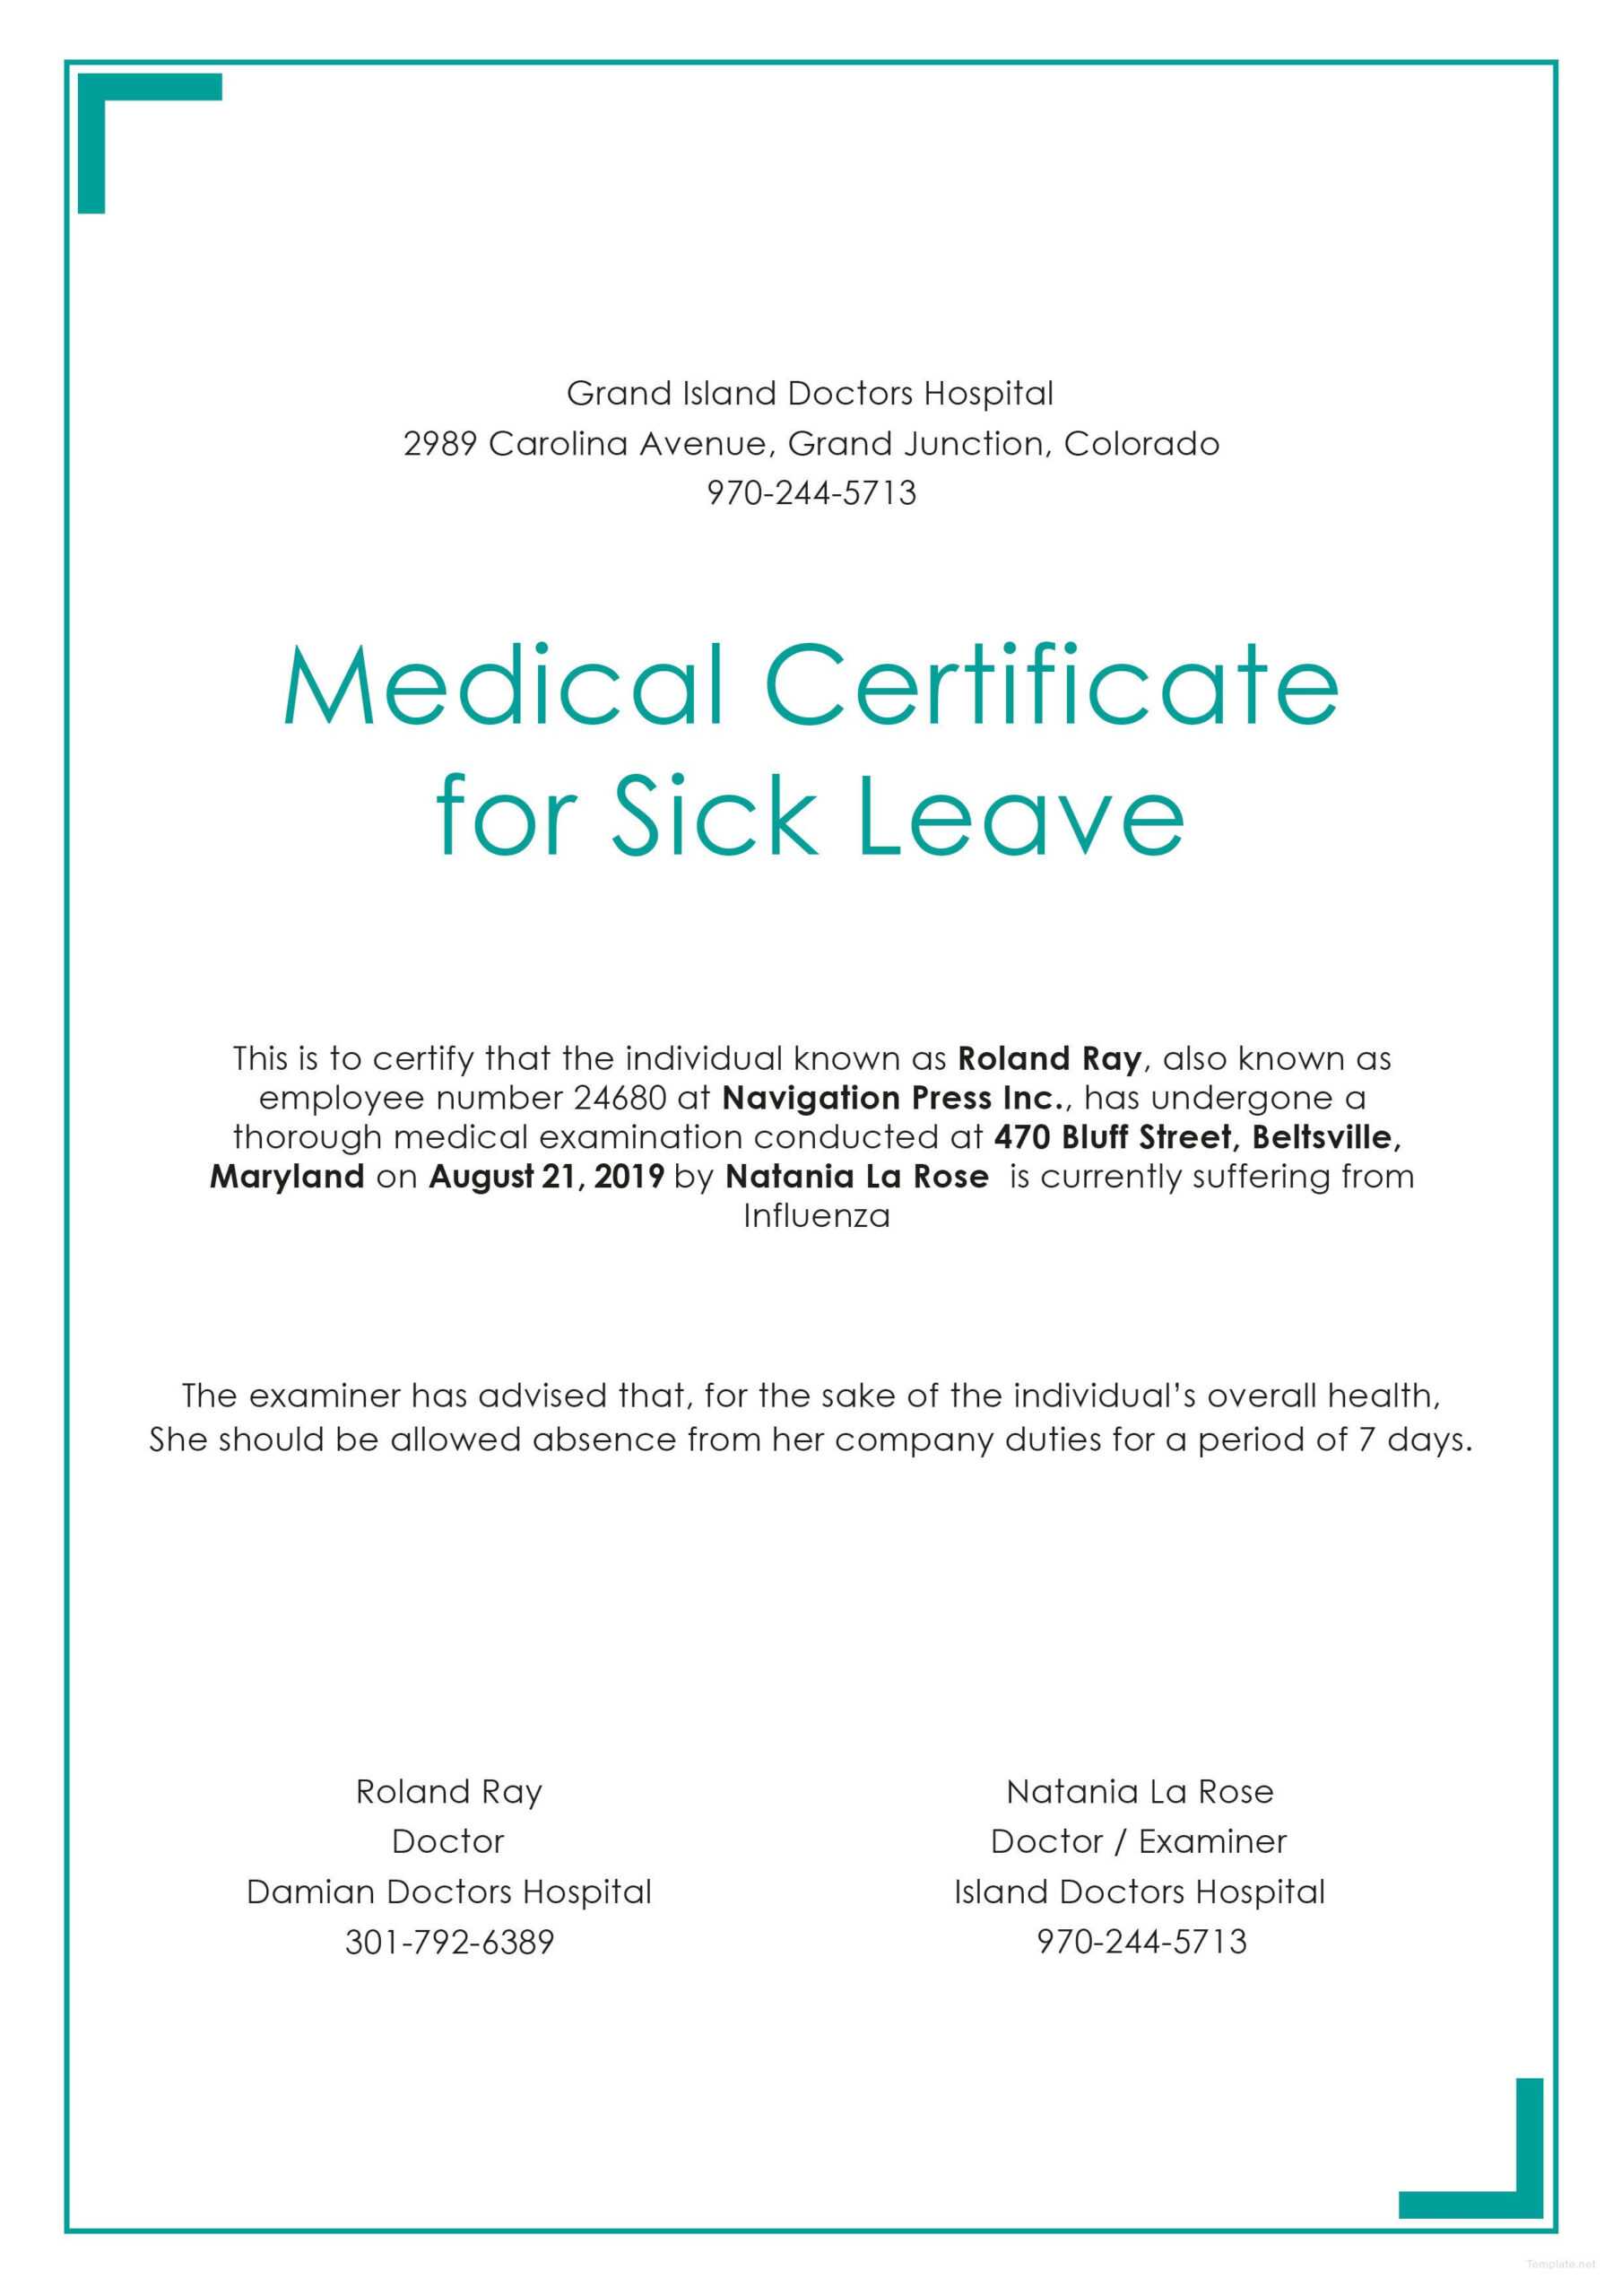 Free Medical Certificate For Sick Leave | Medical, Doctors With Medical Report Template Doc